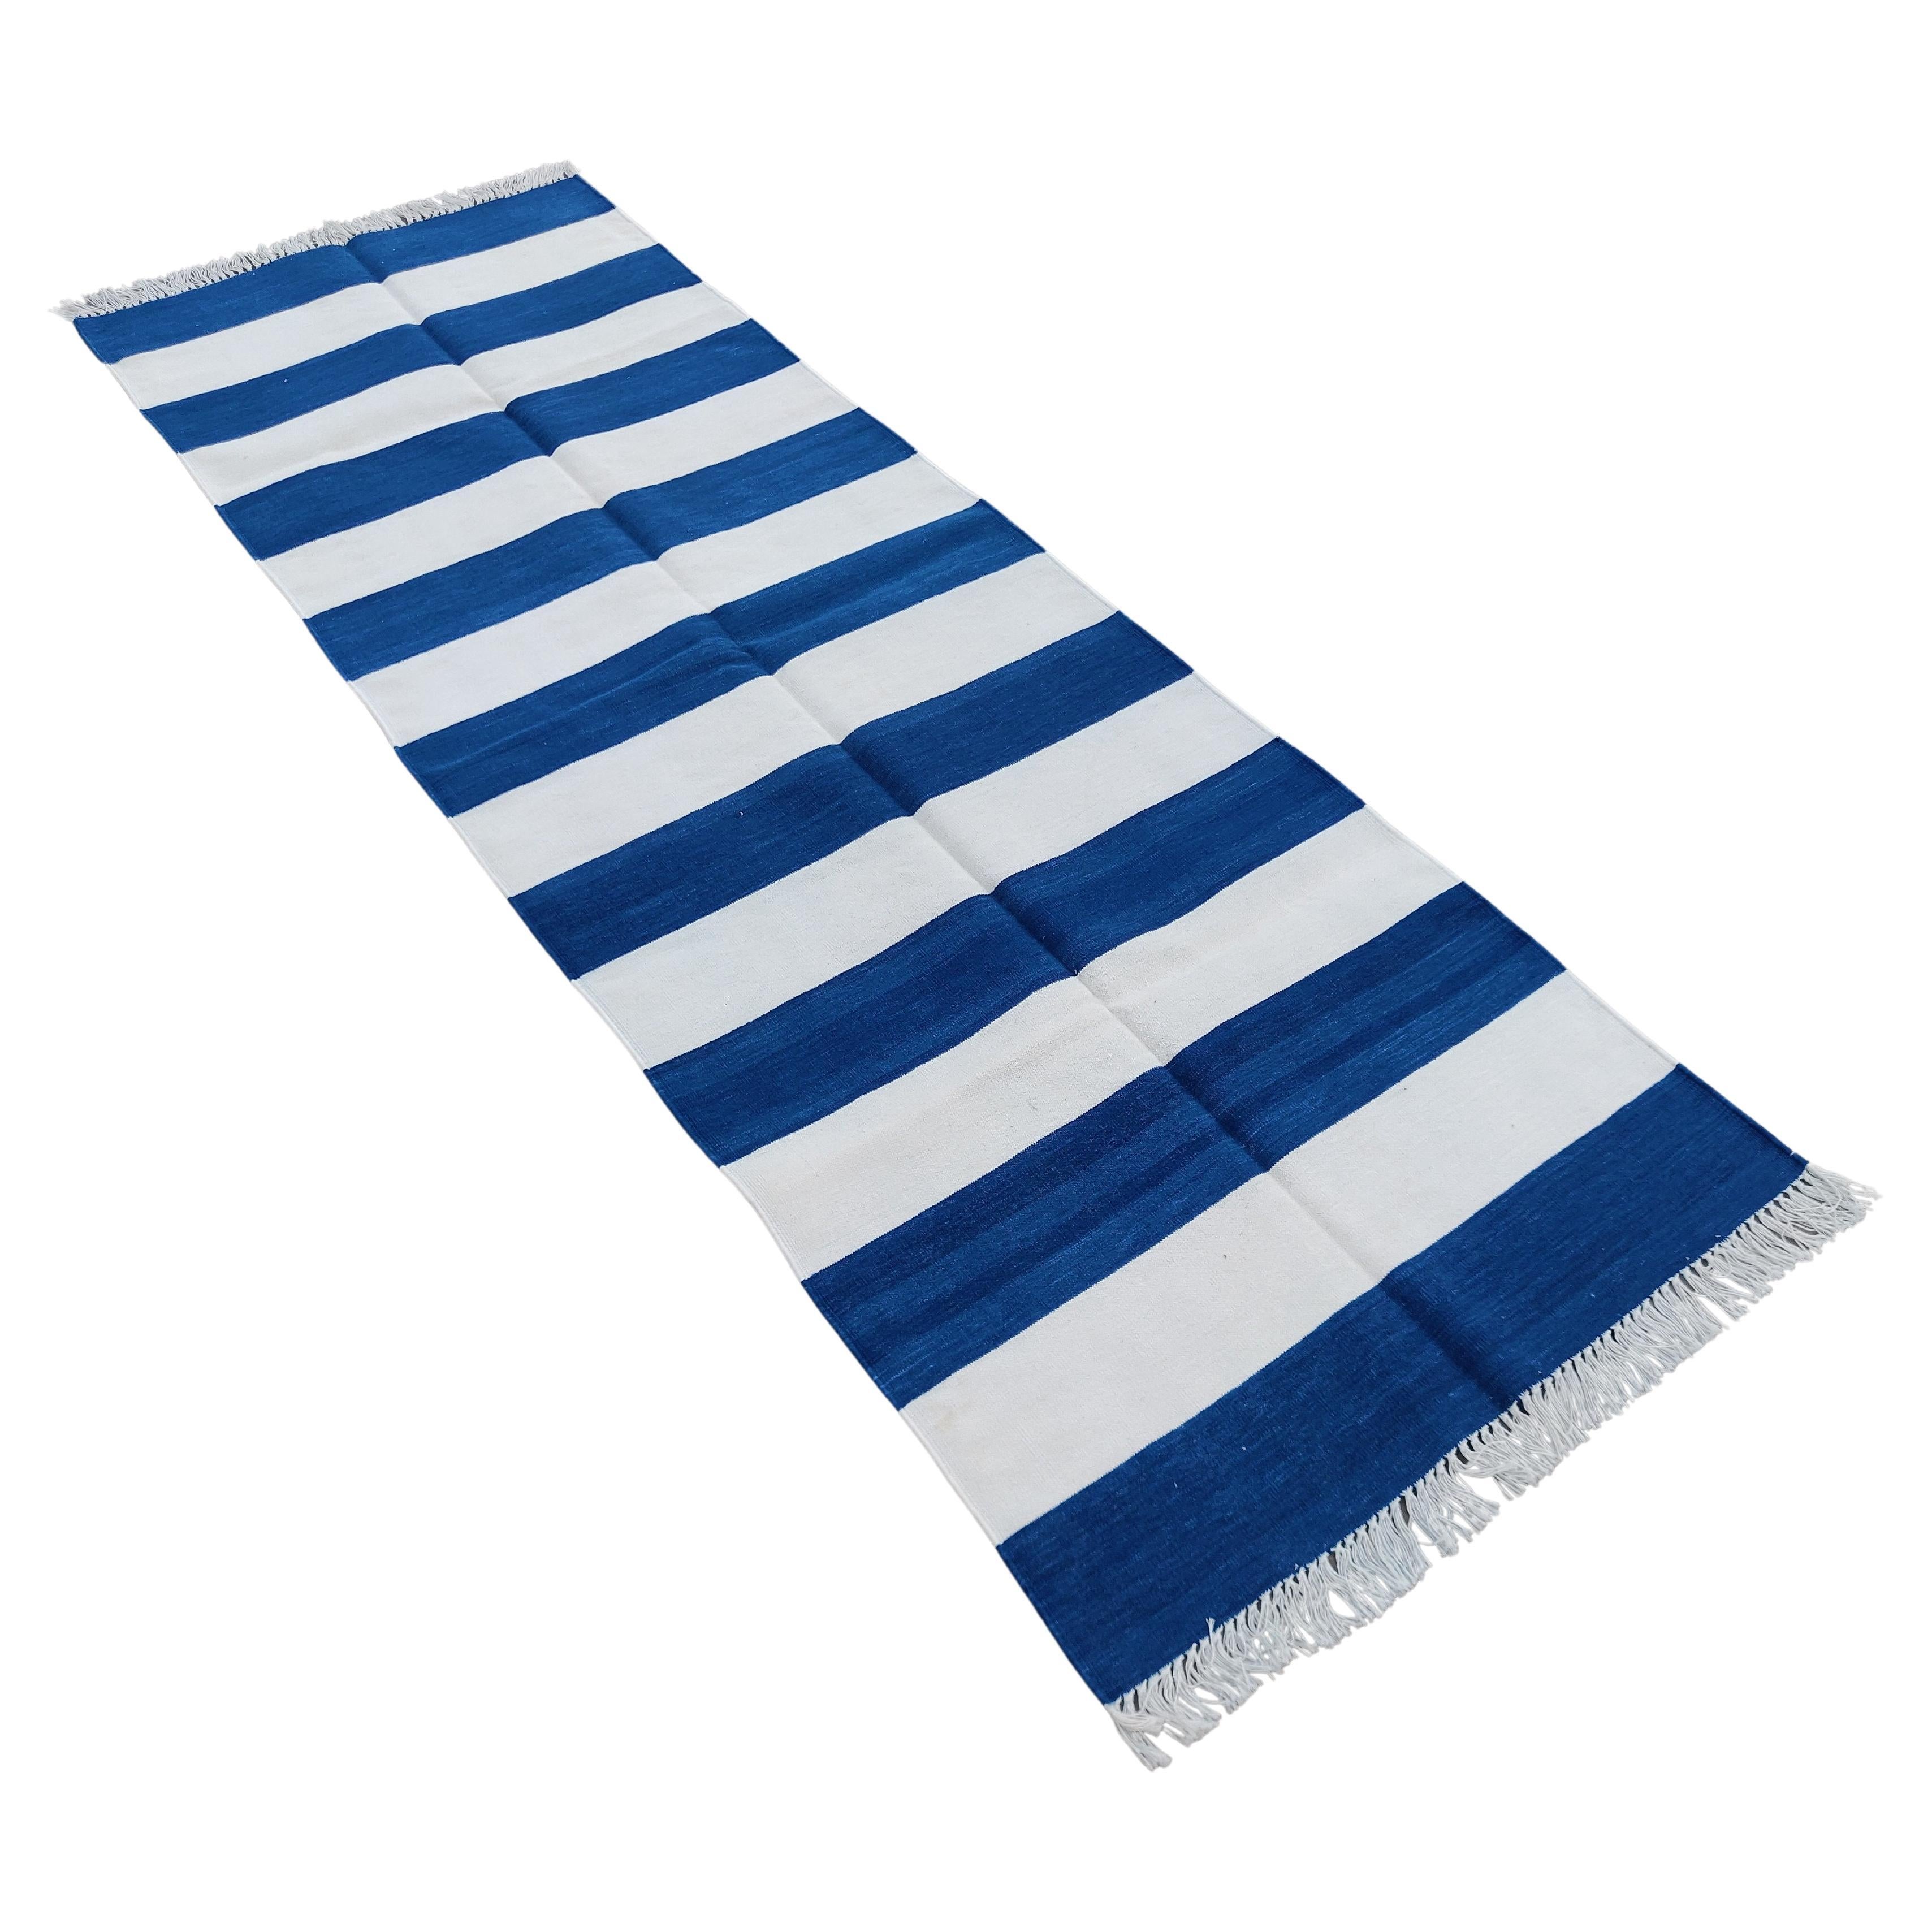 Handmade Cotton Area Flat Weave Runner, 2.5x8 Blue, White Striped Indian Dhurrie